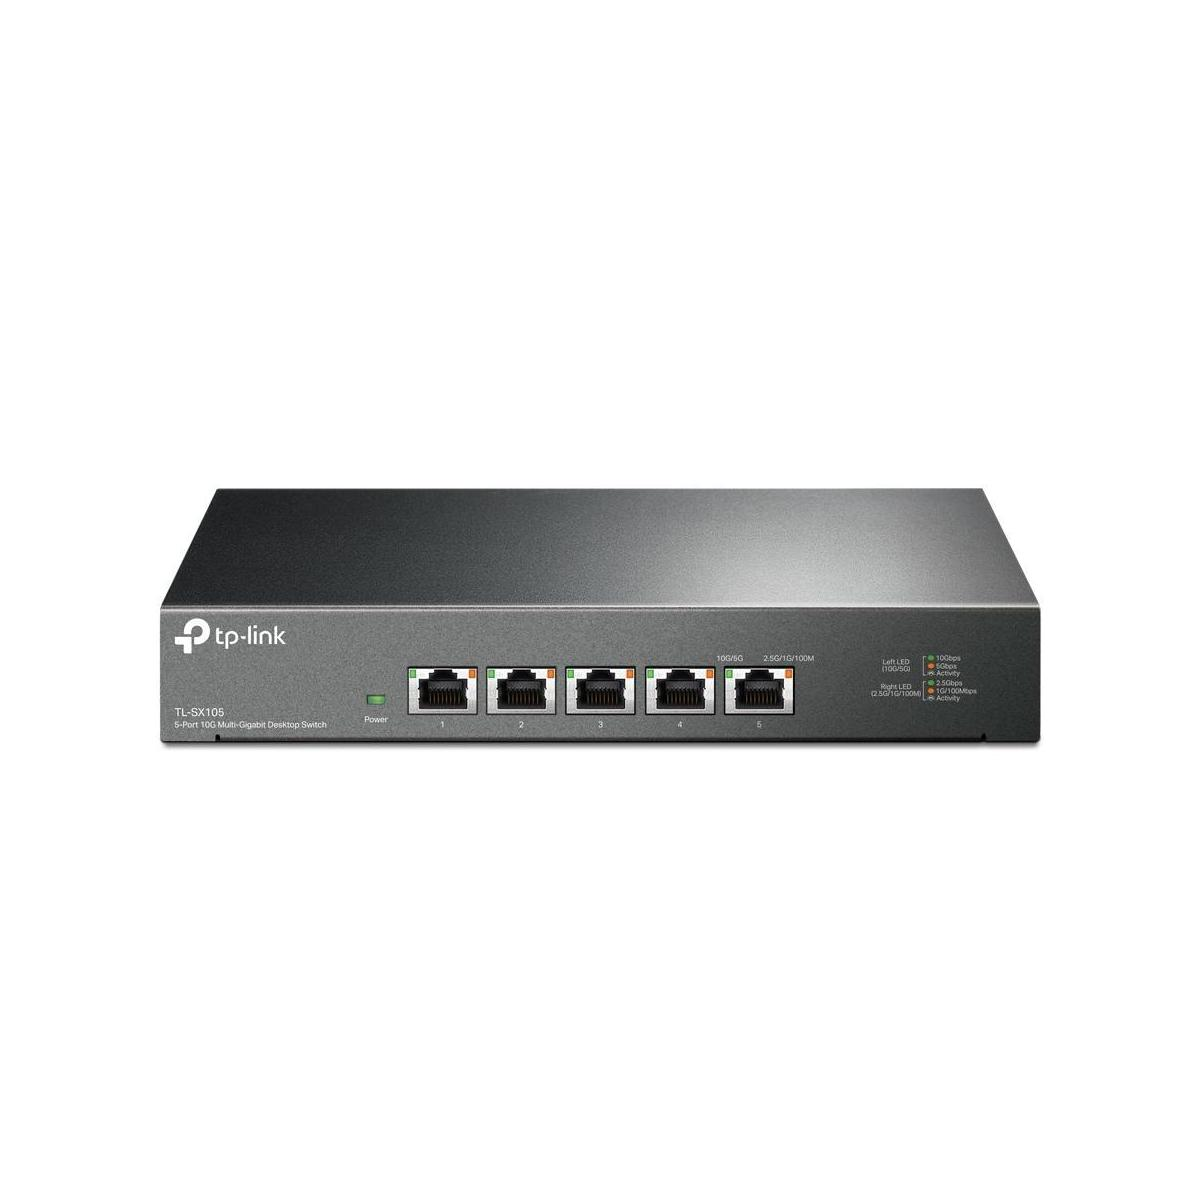 TP-LINK 6935 Switch 5